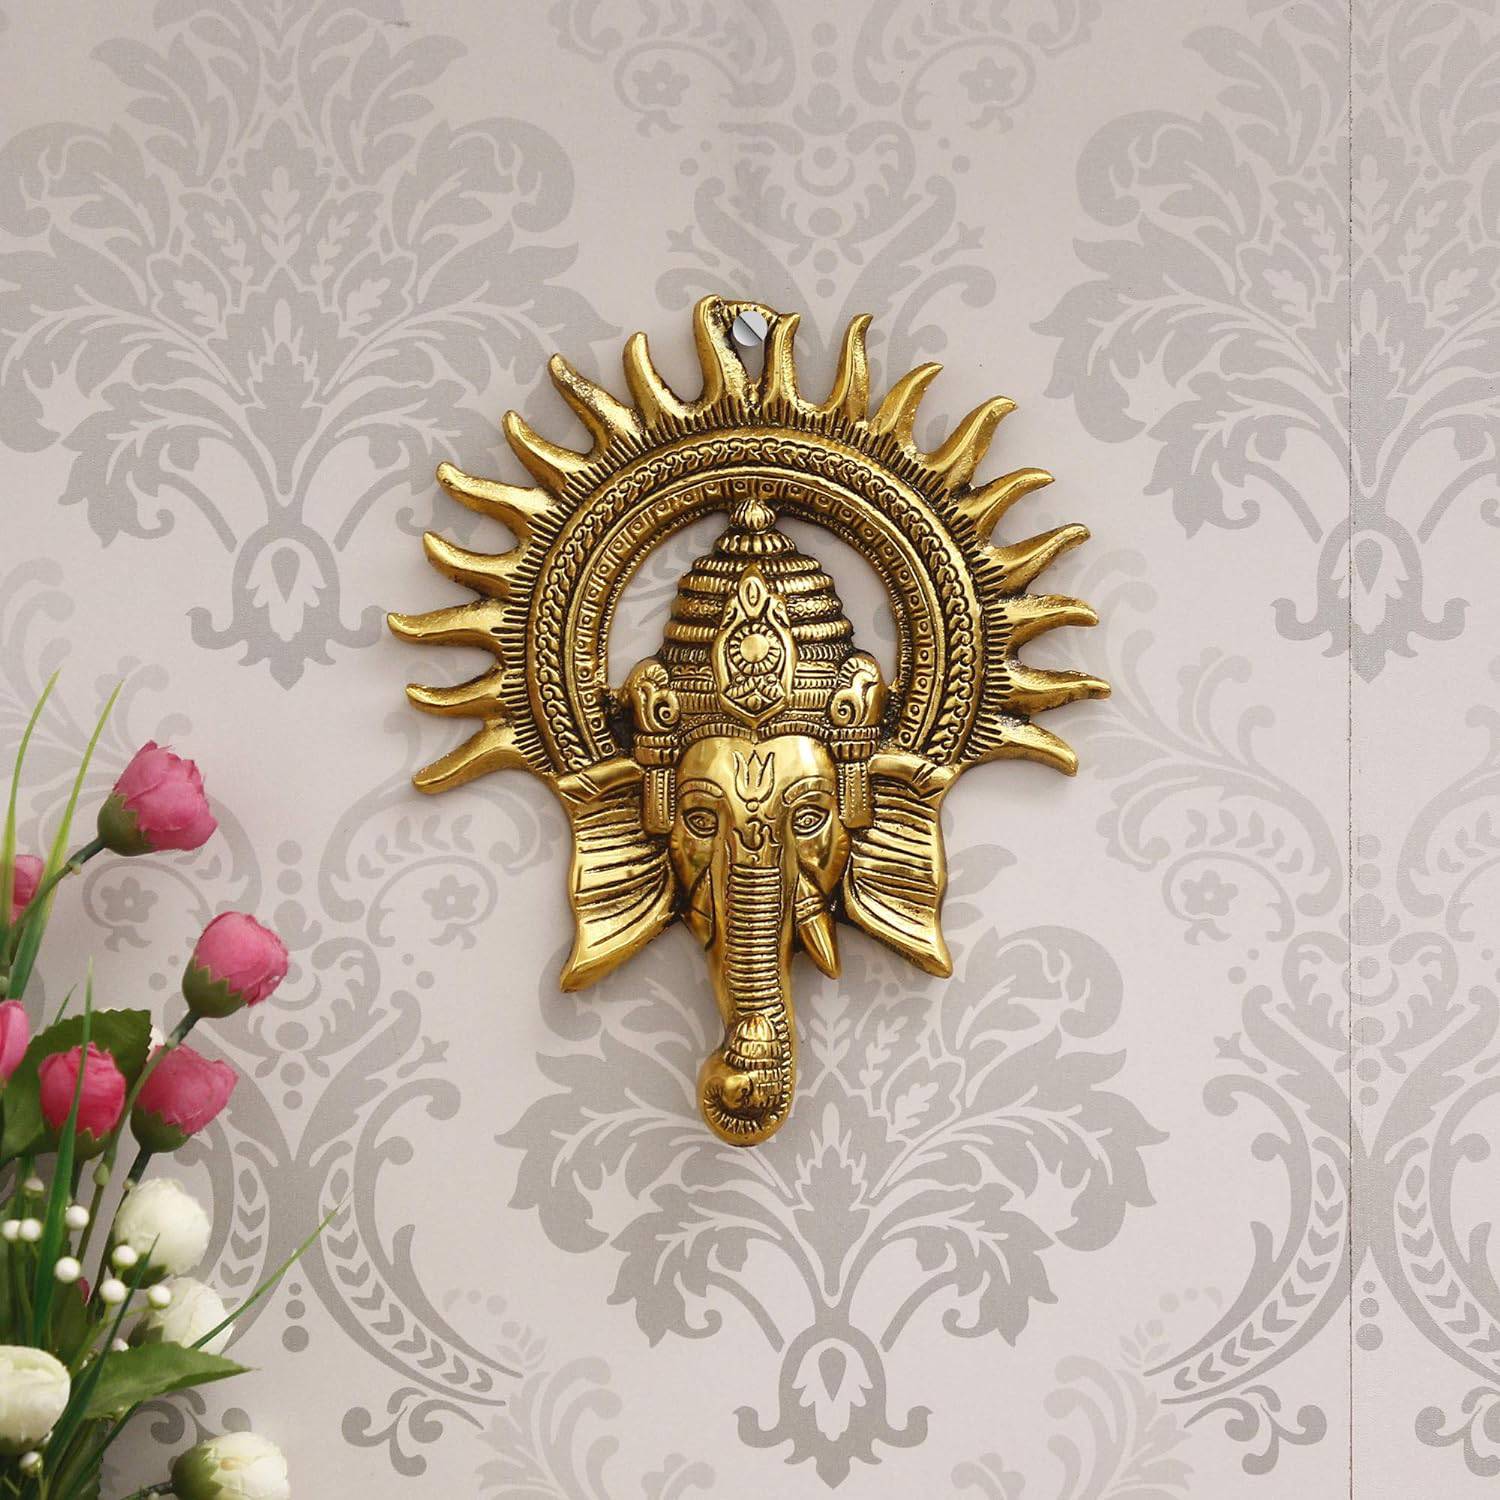 Golden Lord Ganesha With Sun Decorative Metal Wall Hanging Art Decorative Showpiece For Wall Decor, Festival Home Decor Pooja Room Temple & Gift For Family, Friends, Housewarming - YuvaFlowers